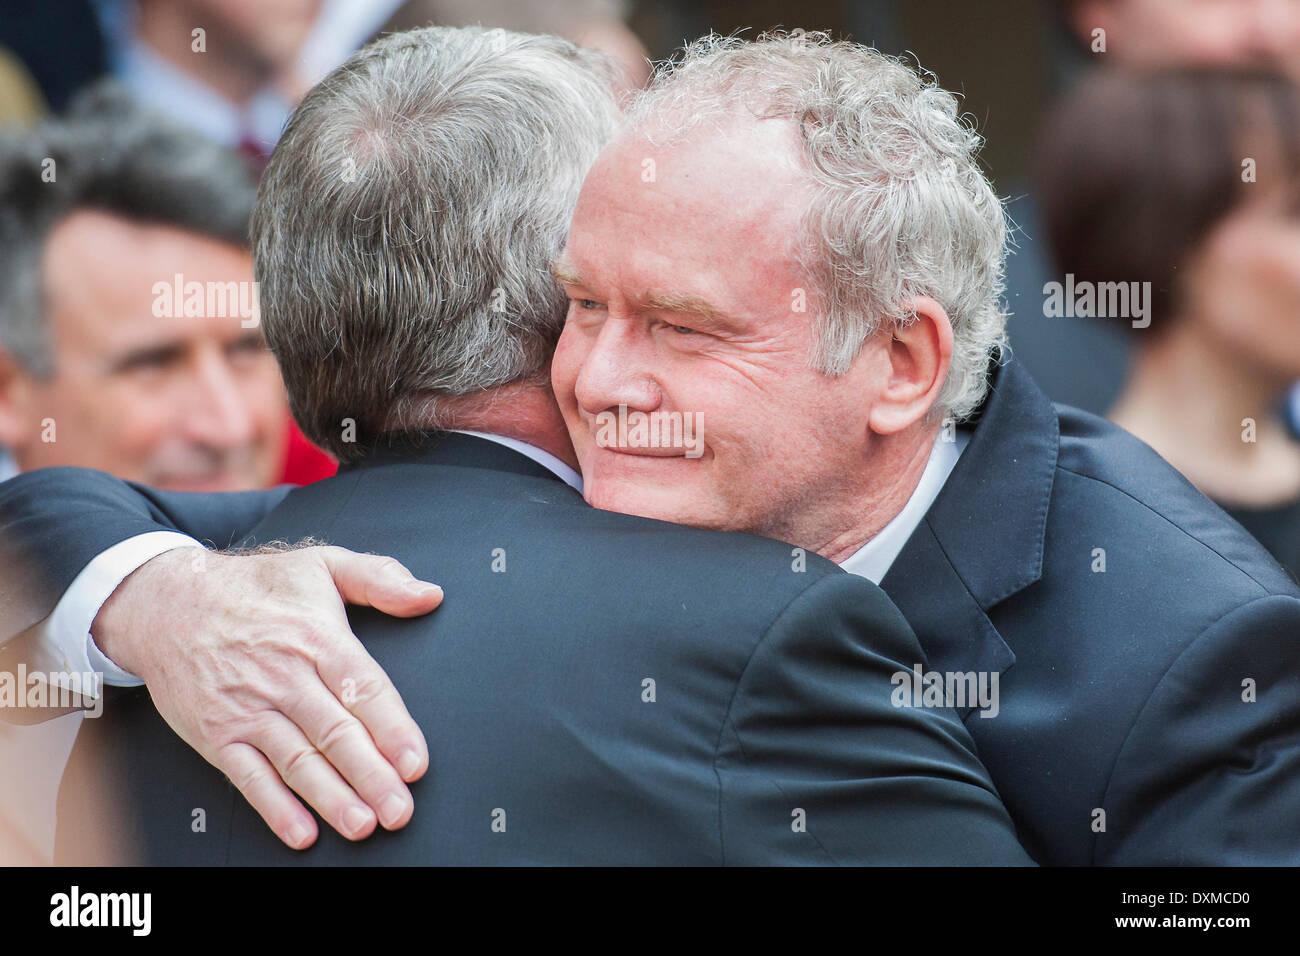 London, UK . 27th Mar, 2014. Martin McGuiness hugs Hilary Benn on his way out. Tony Benn's funeral at 11.00am at St Margaret's Church, Westminster. His body was brought in a hearse from the main gates of New Palace Yard at 10.45am, and was followed by members of his family on foot. The rout was lined by admirers. On arrival at the gates it was carried into the church by members of the family. Thursday 27th March 2014, London, UK. Credit:  Guy Bell/Alamy Live News Stock Photo